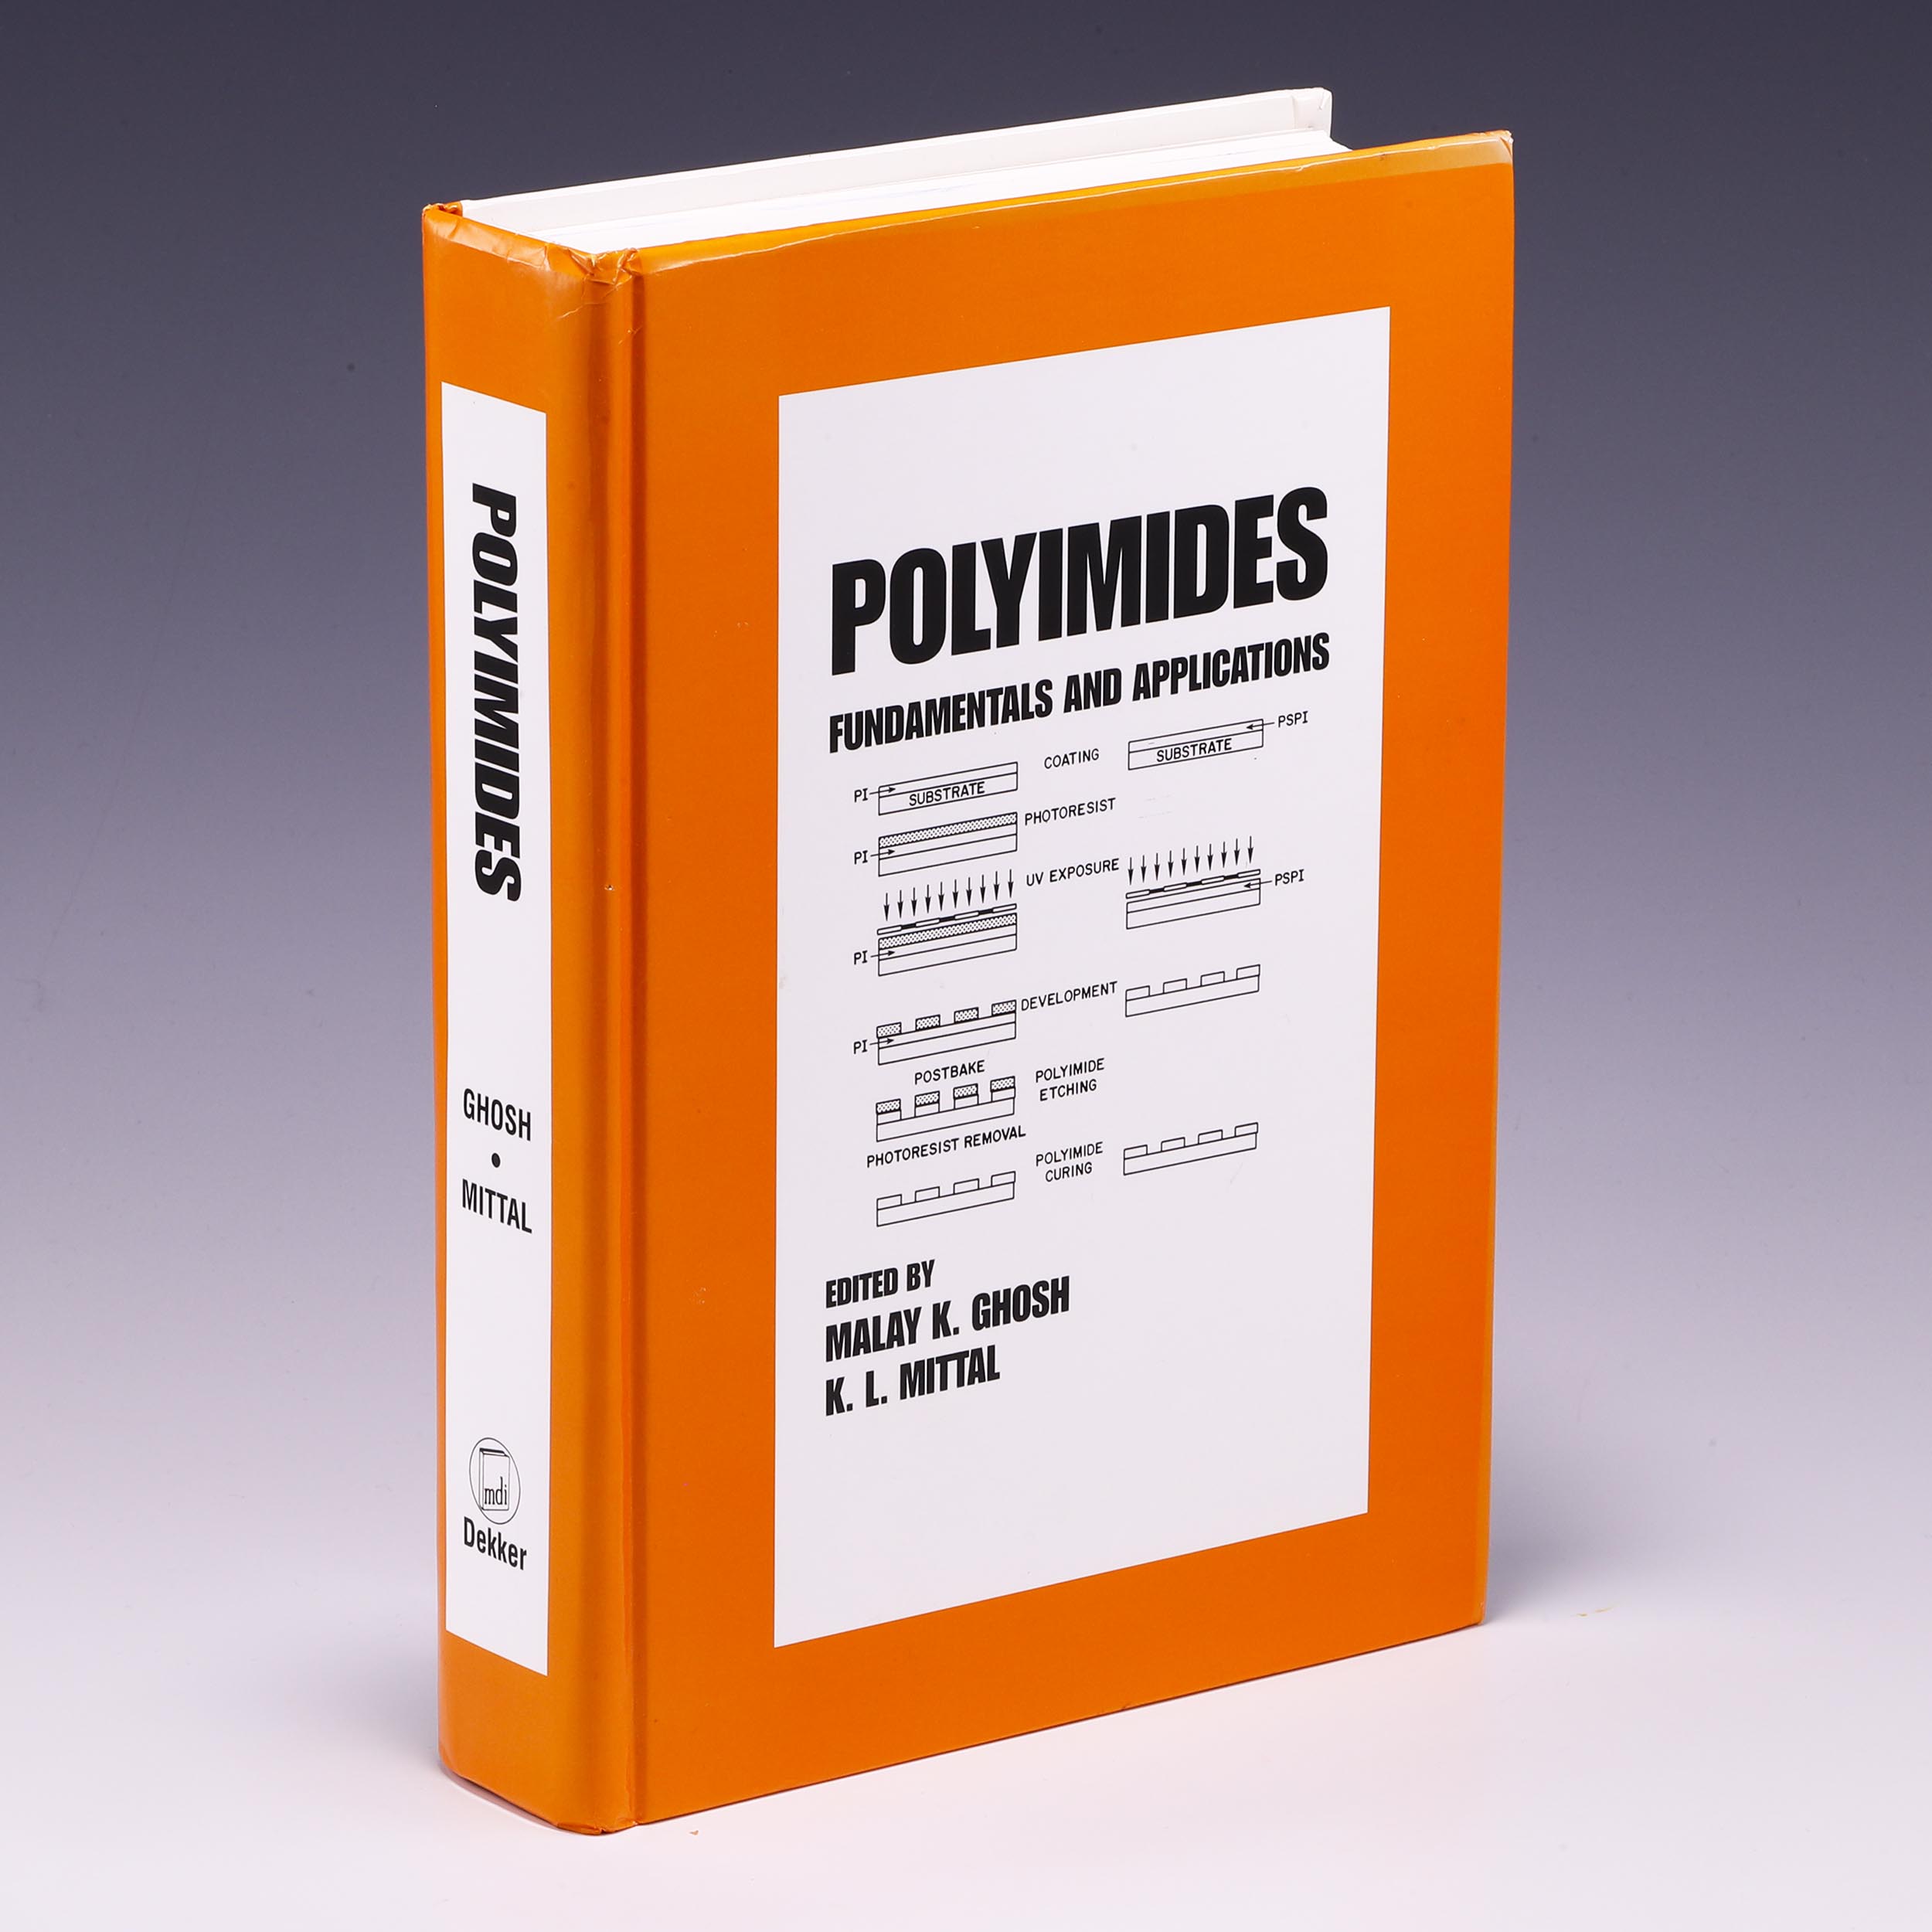 Polyimides: Fundamentals and Applications (Plastics Engineering) by